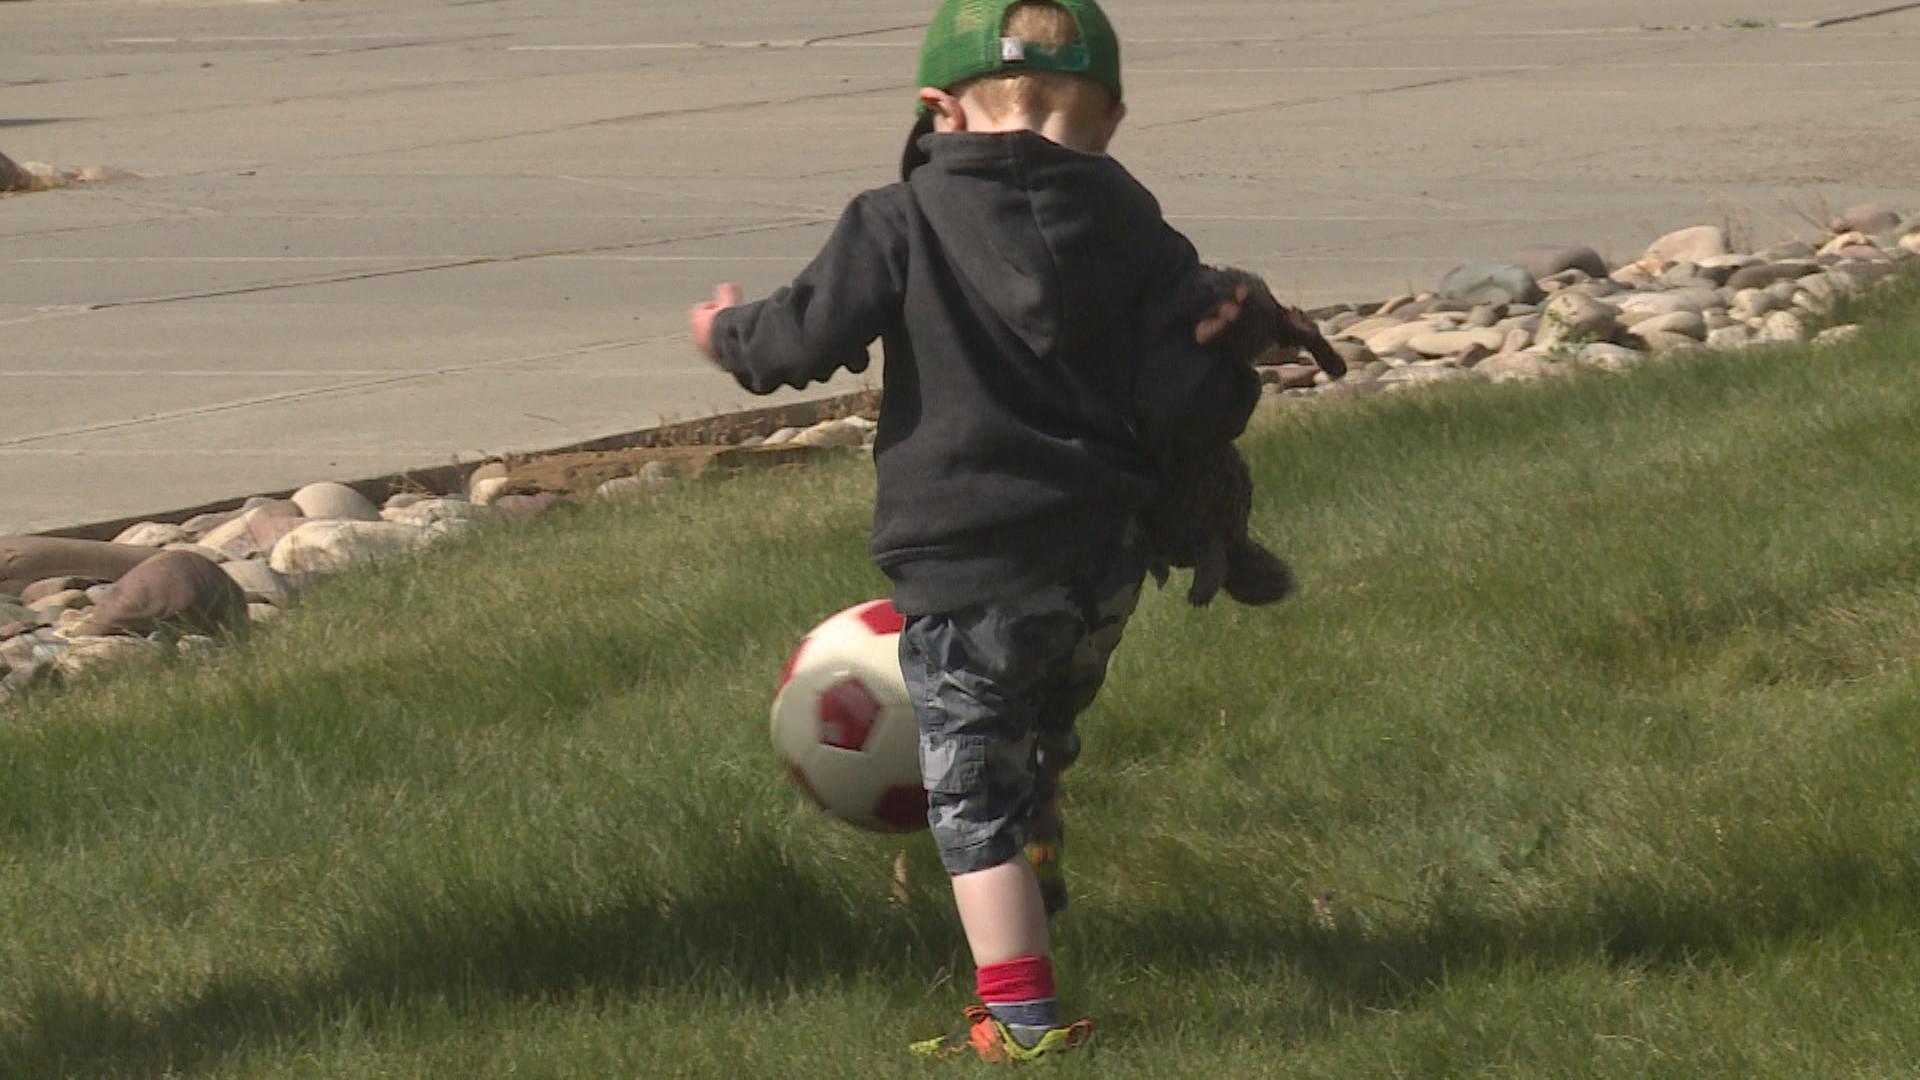 University of Lethbridge researchers are finding out how the  COVID-19 pandemic is negatively impacting activity levels in Alberta;s children.